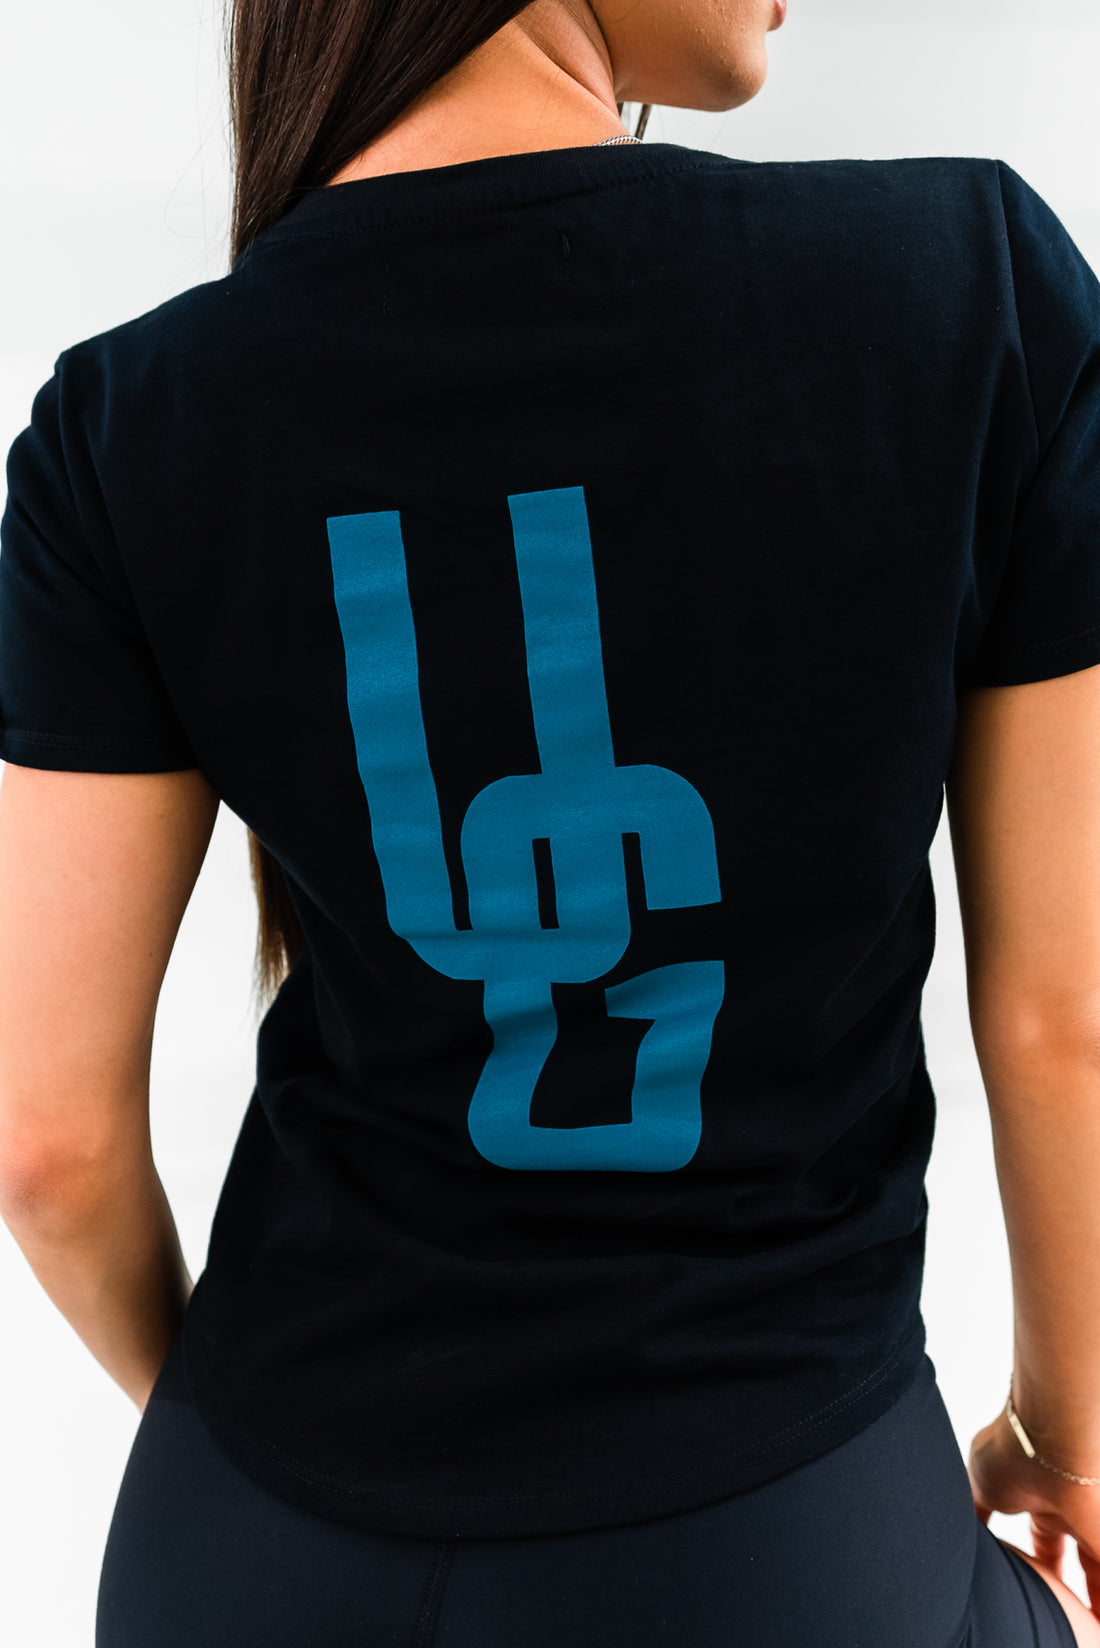 Fitted Black Tee x Blue